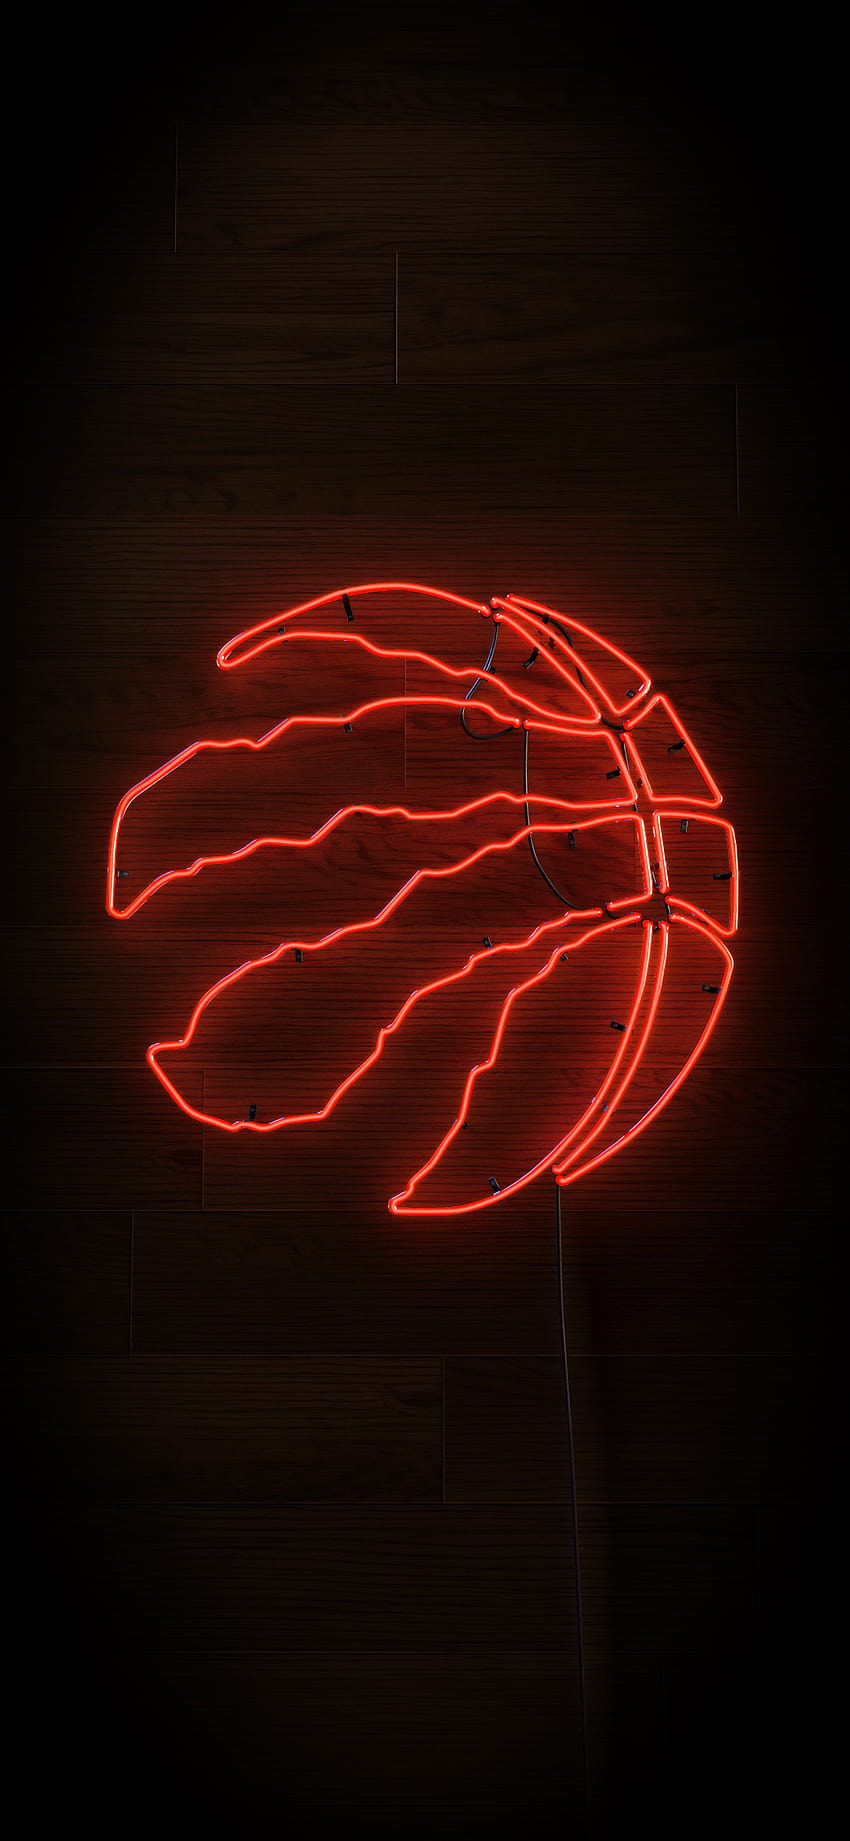 Created a phone in anticipation of tonight's game, toronto raptors 2019 HD phone wallpaper